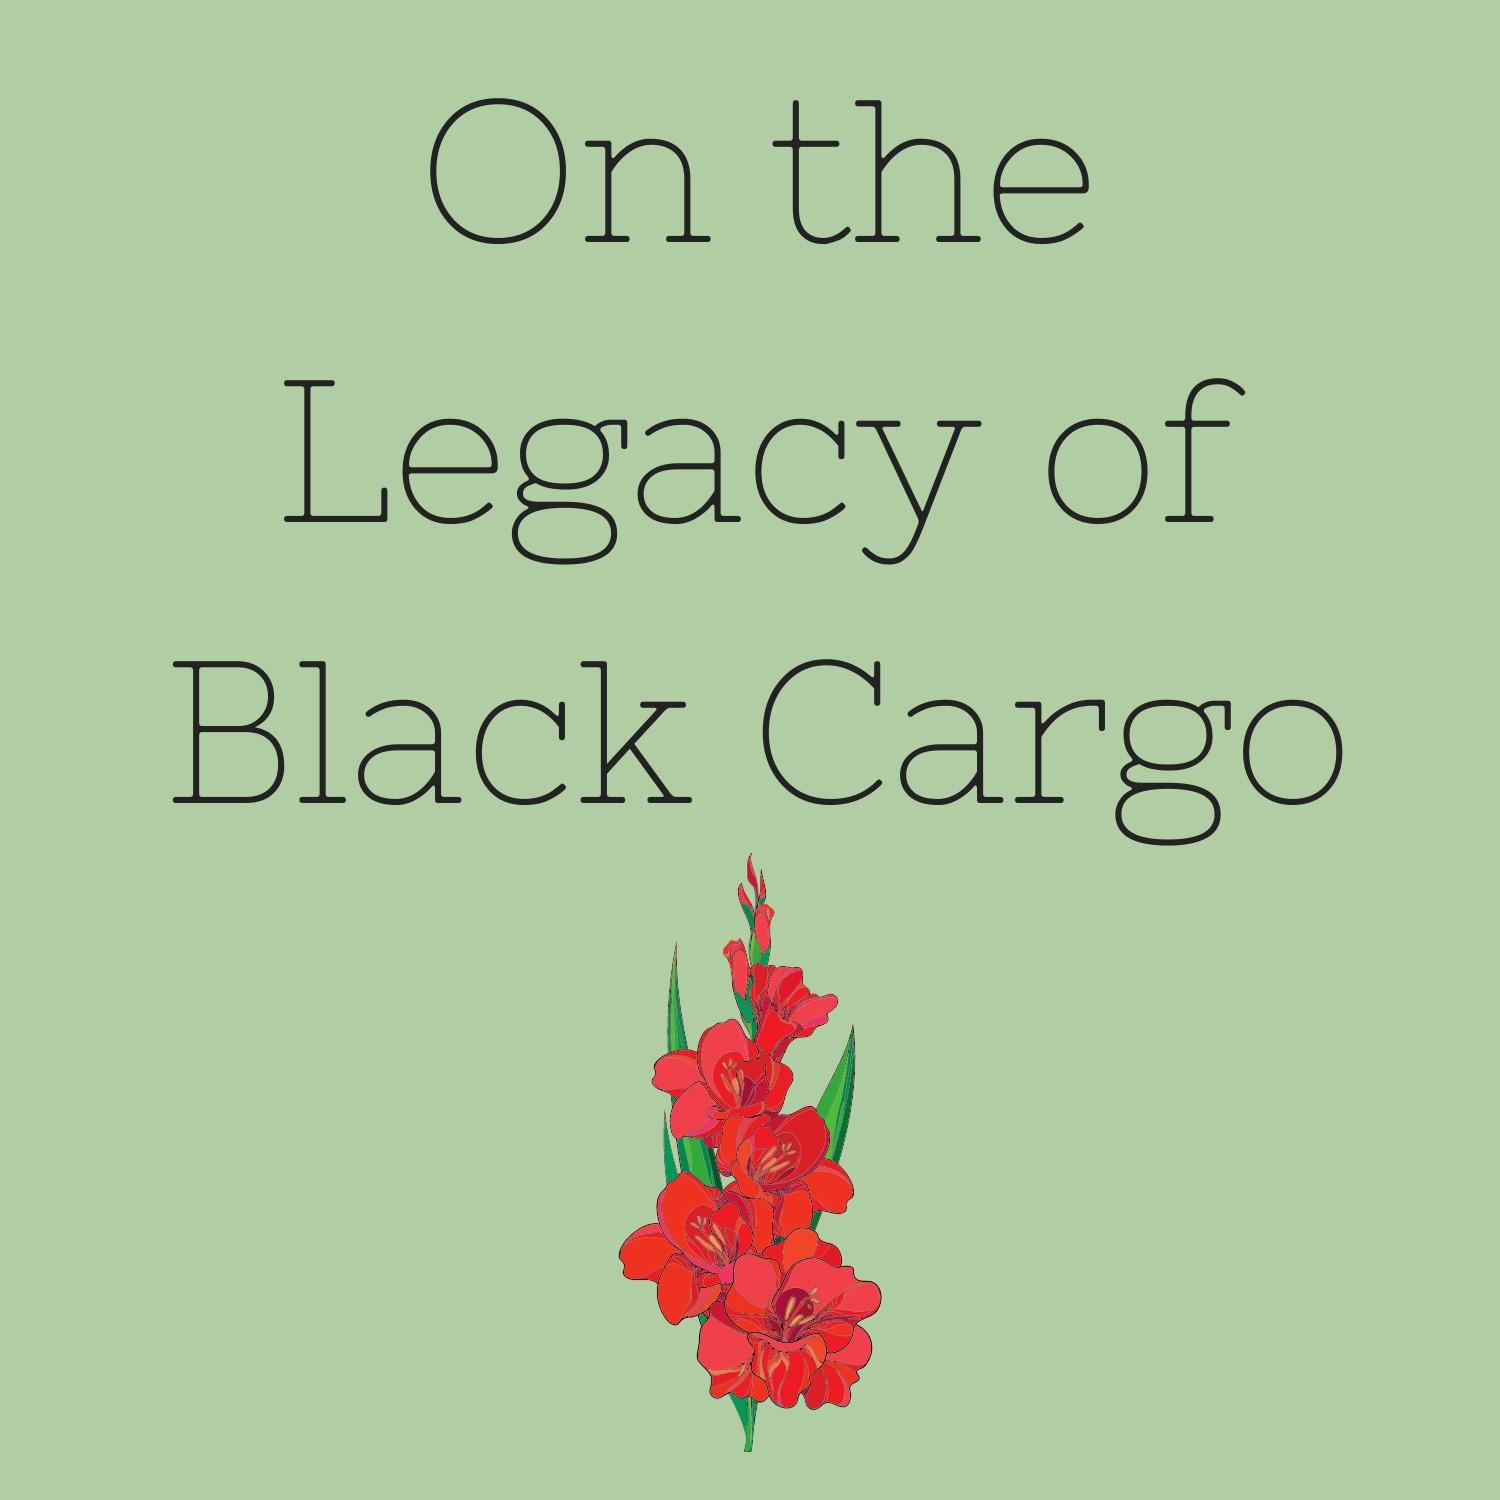 On the Legacy of Black Cargo